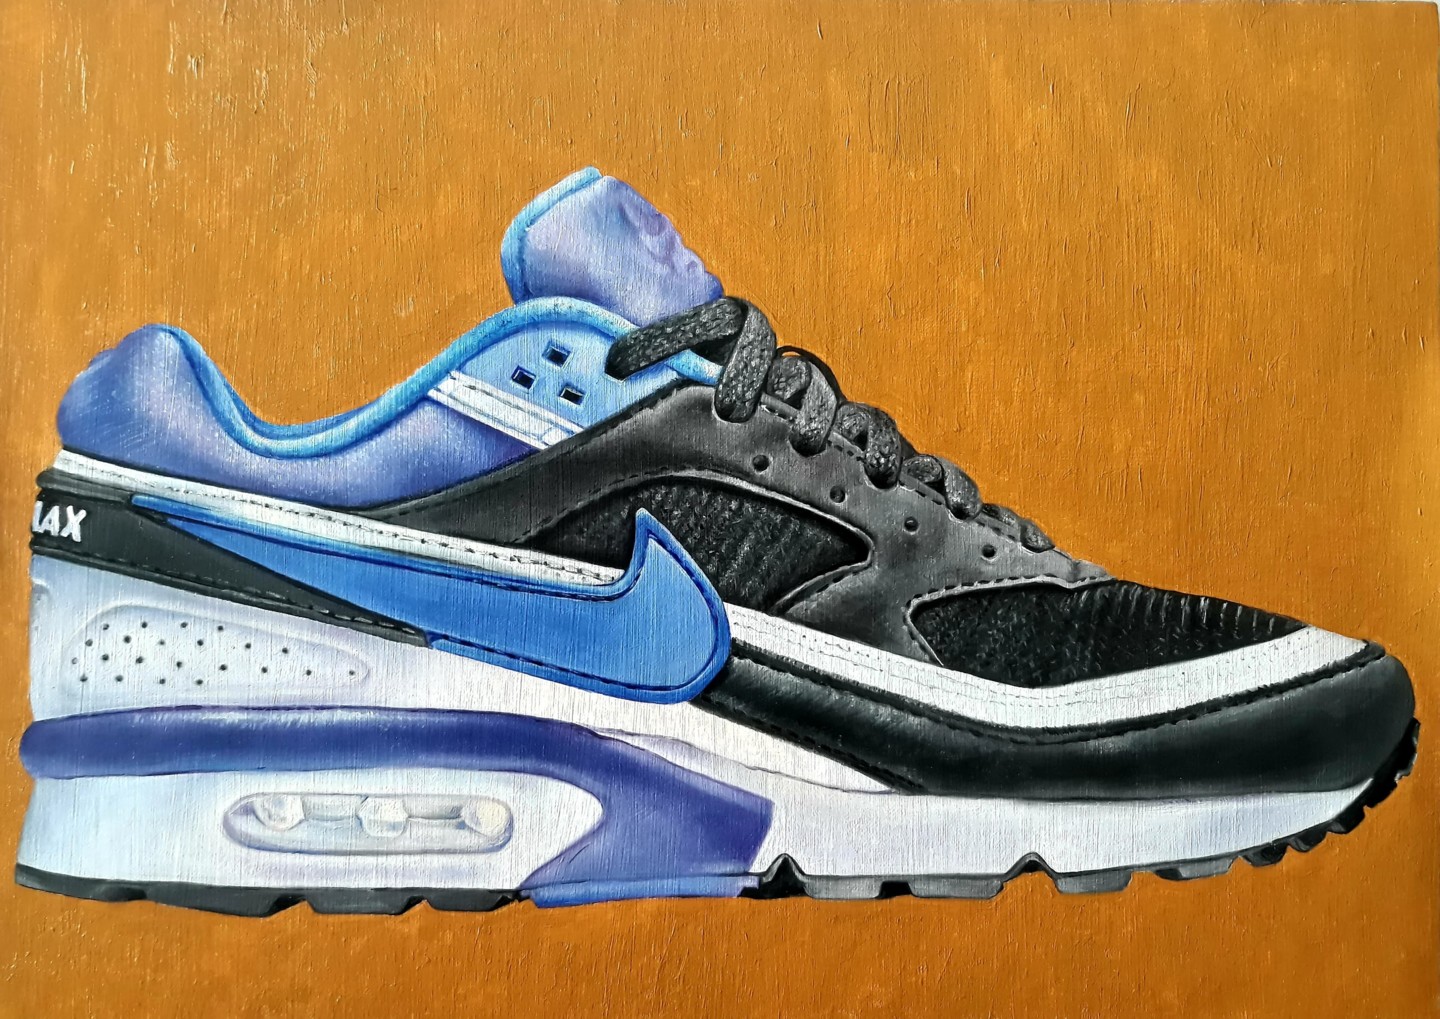 Nike Air Max Bw 1991, Painting by 